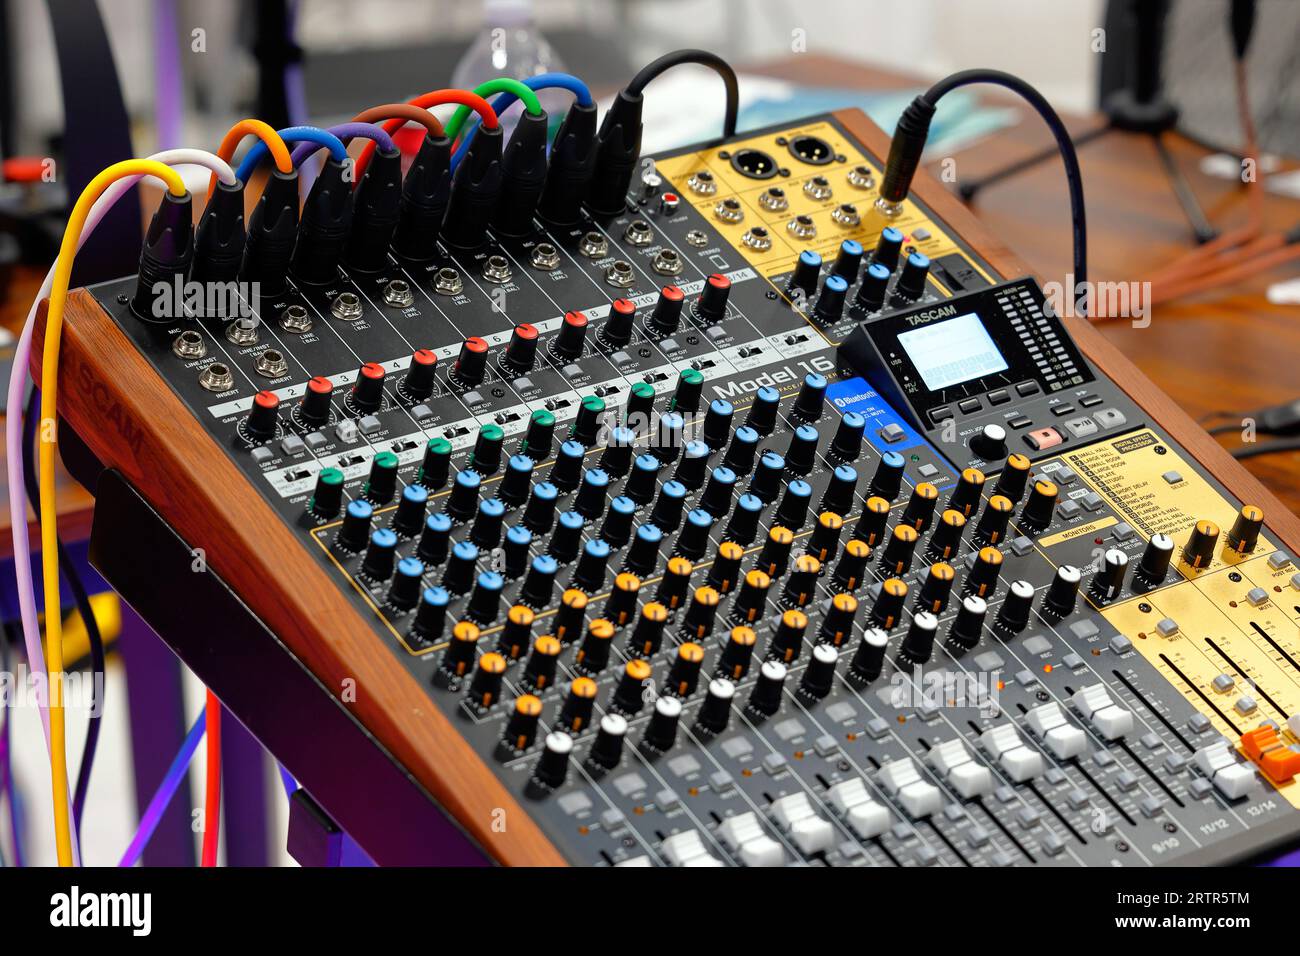 A Tascam Model 16 studio mixer interface and multitrack recording device with colored XLR microphone inputs attached. Stock Photo